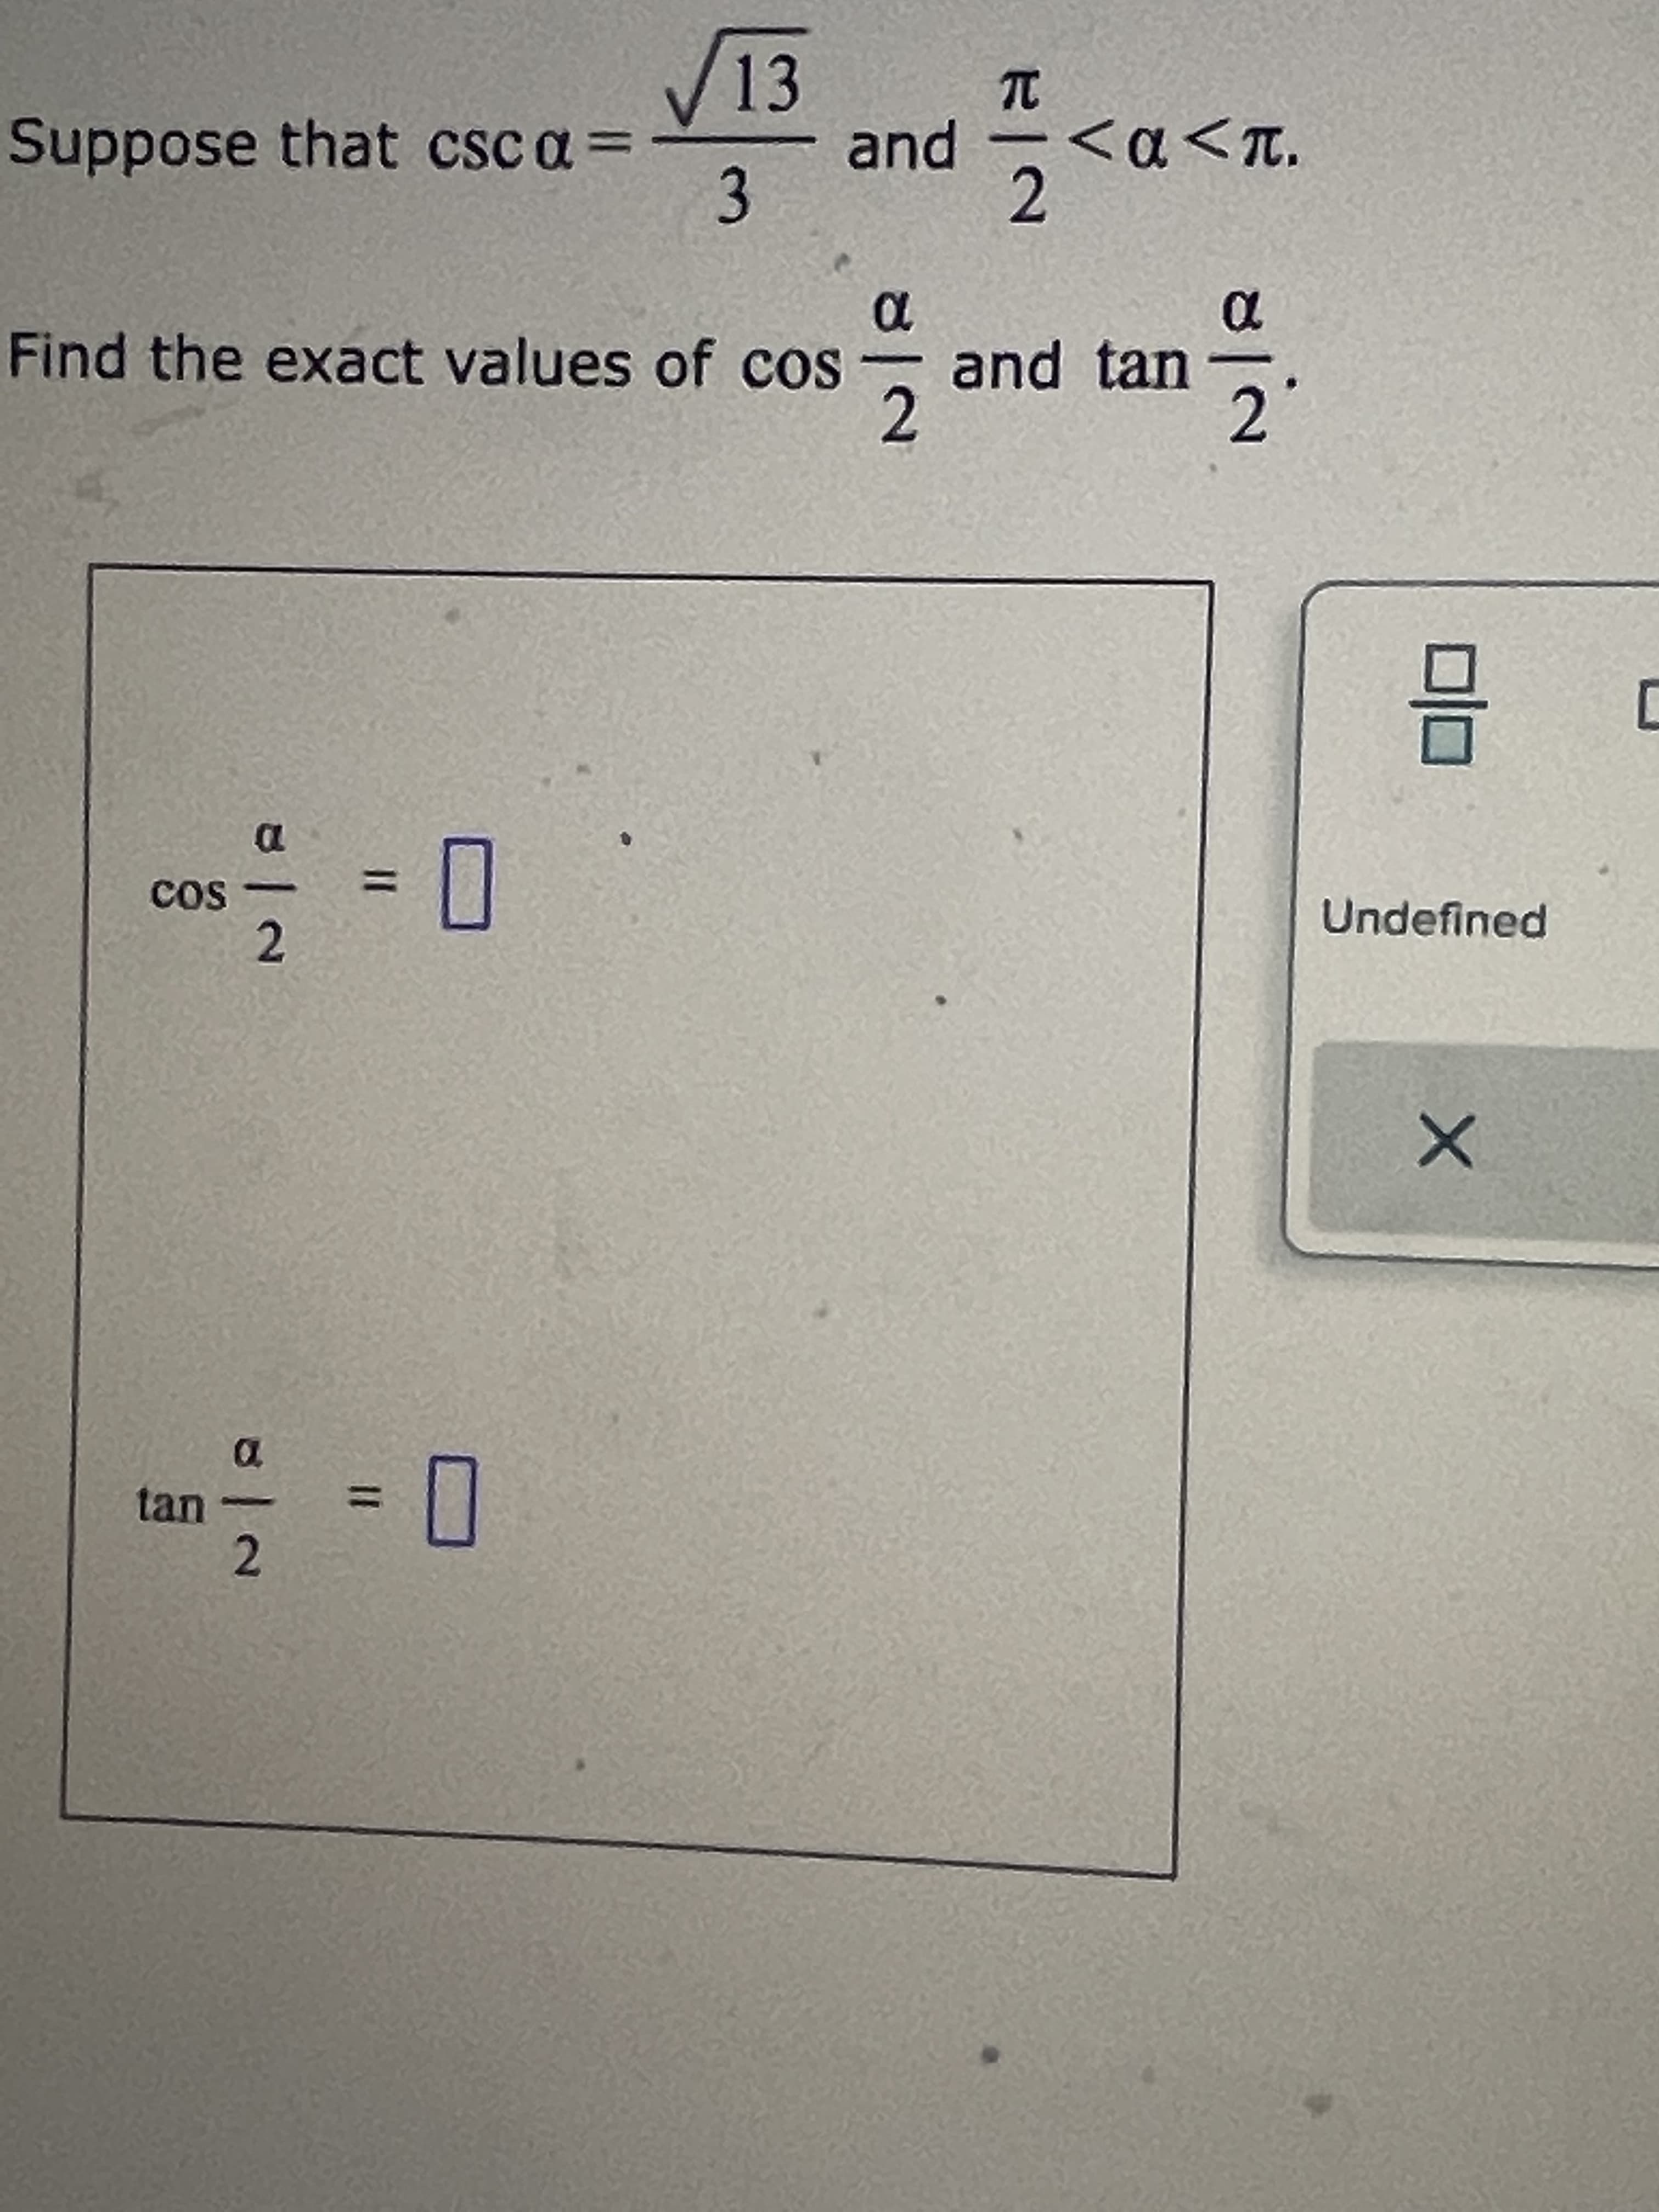 13D
13
Suppose that csc a =
and
3.
2.
Find the exact values of cos
and tan
2.
cos -
2.
%3D
Undefined
tan
2.
